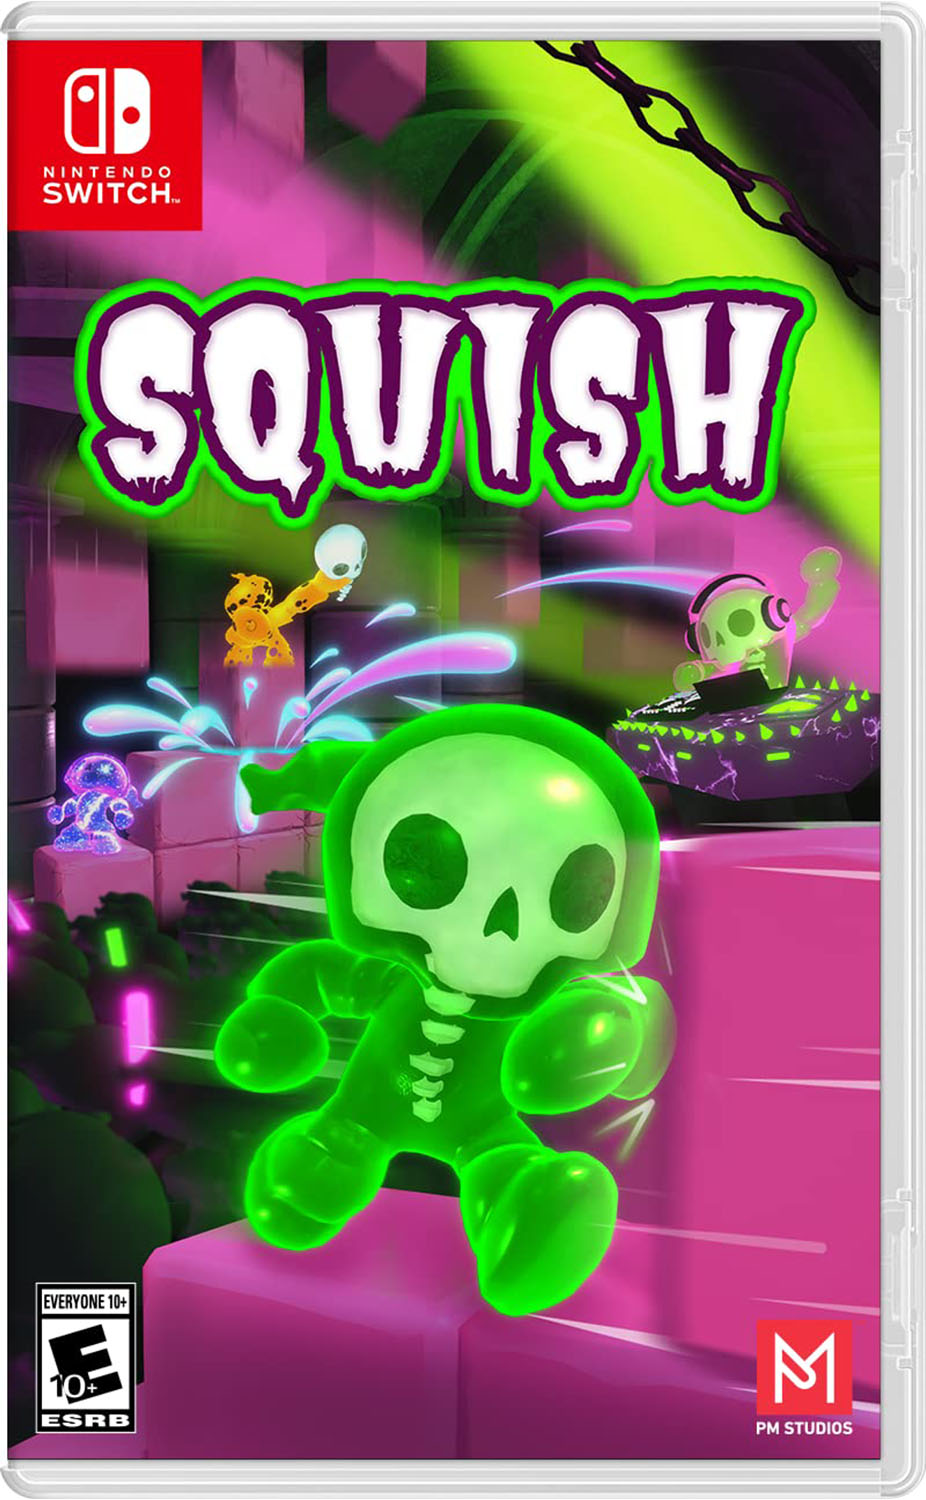 Cover of Squish game with transparent green character running on purple blocks